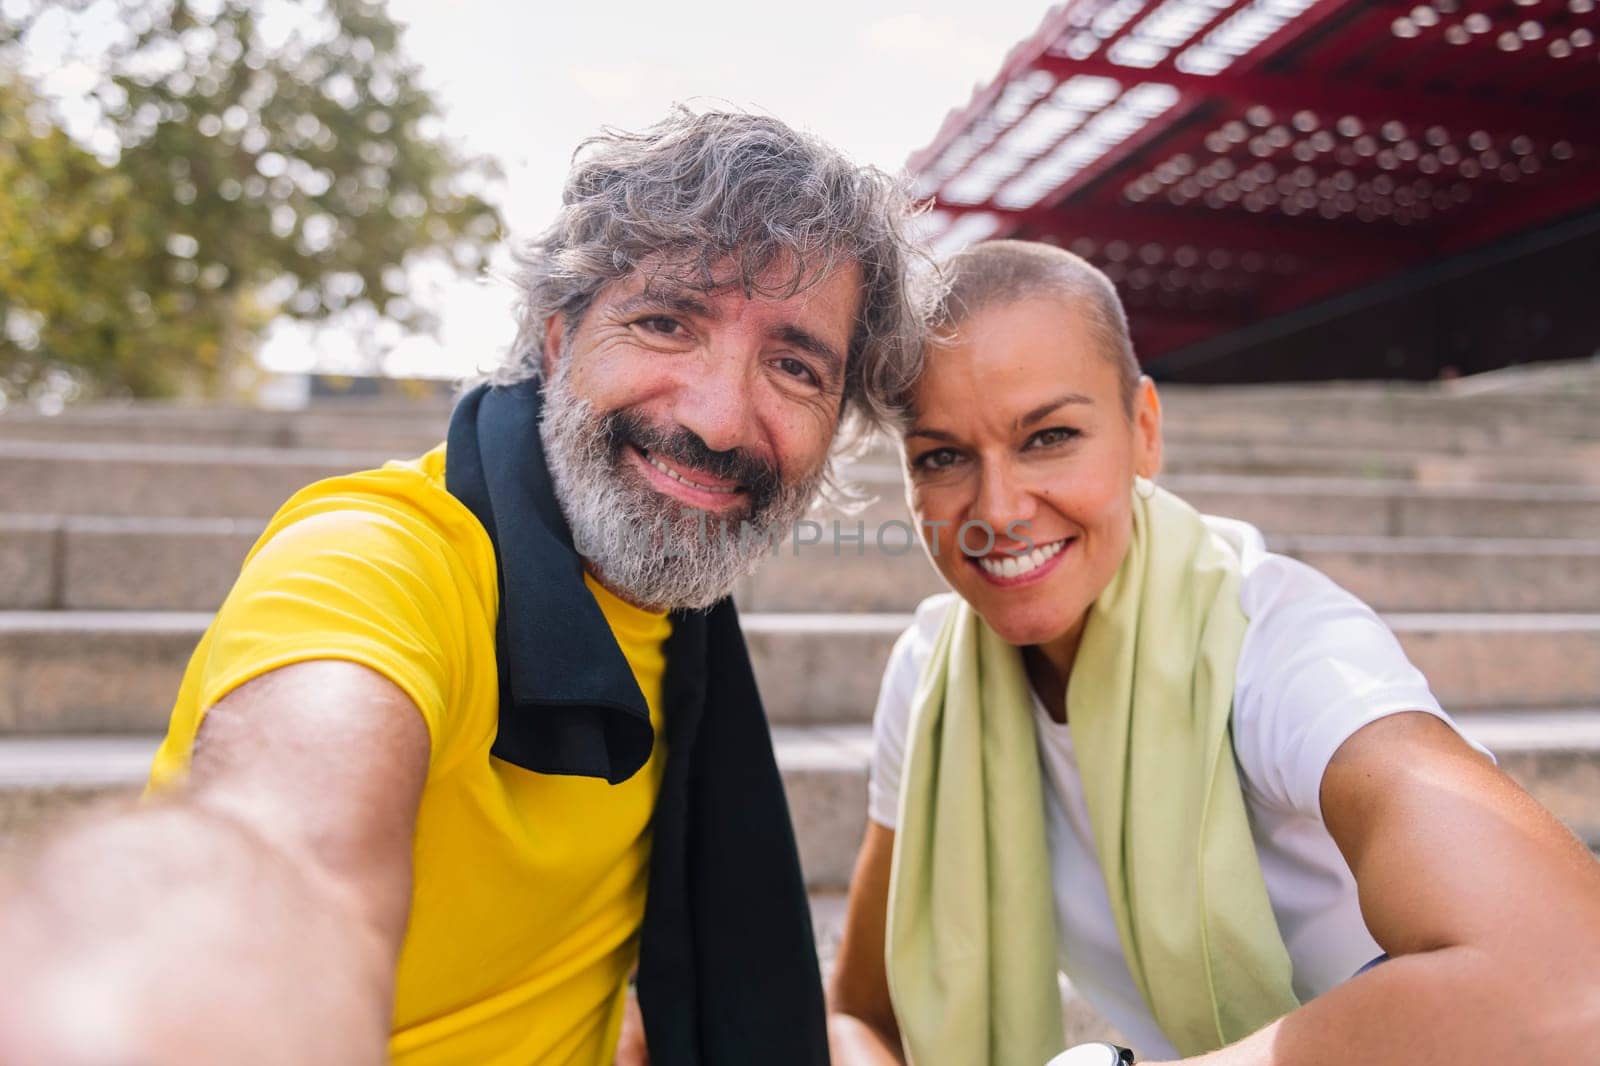 selfie photo of a smiling senior sports man with his personal trainer while they rest after training, concept of technology and healthy lifestyle